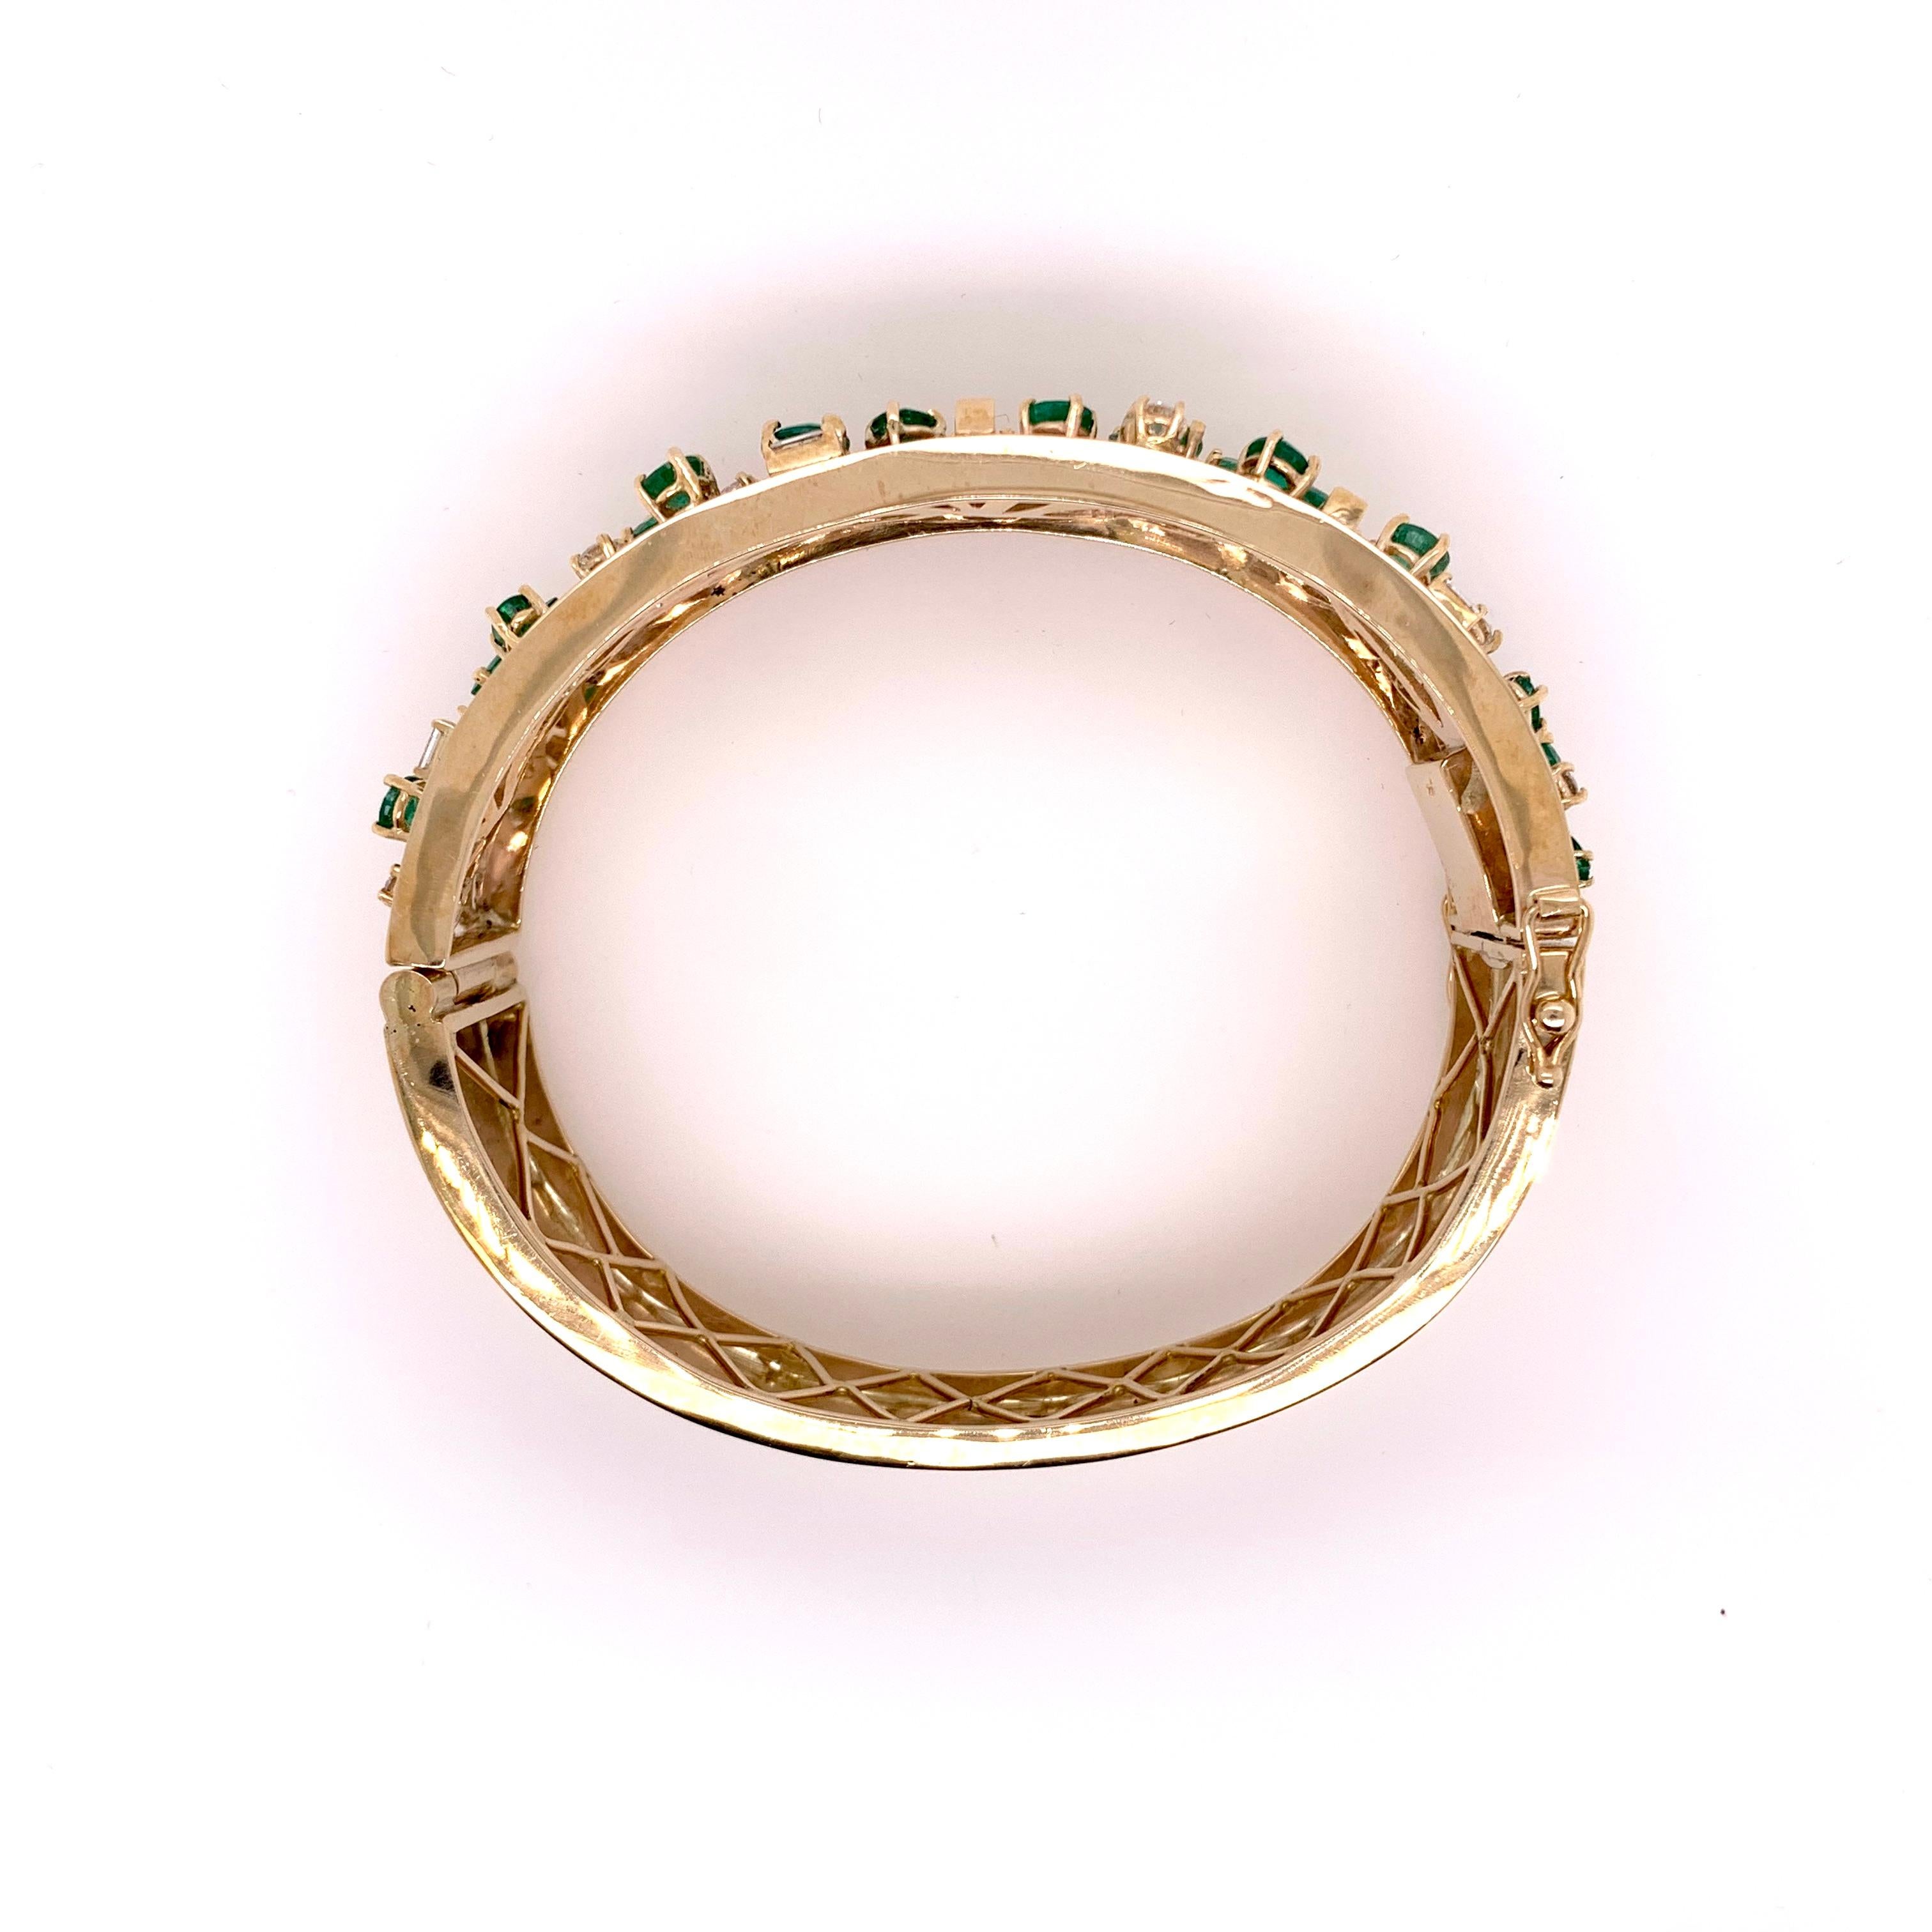 Round Cut Emerald and Diamond Cuff Bangle Bracelet in 14k Yellow Gold For Sale